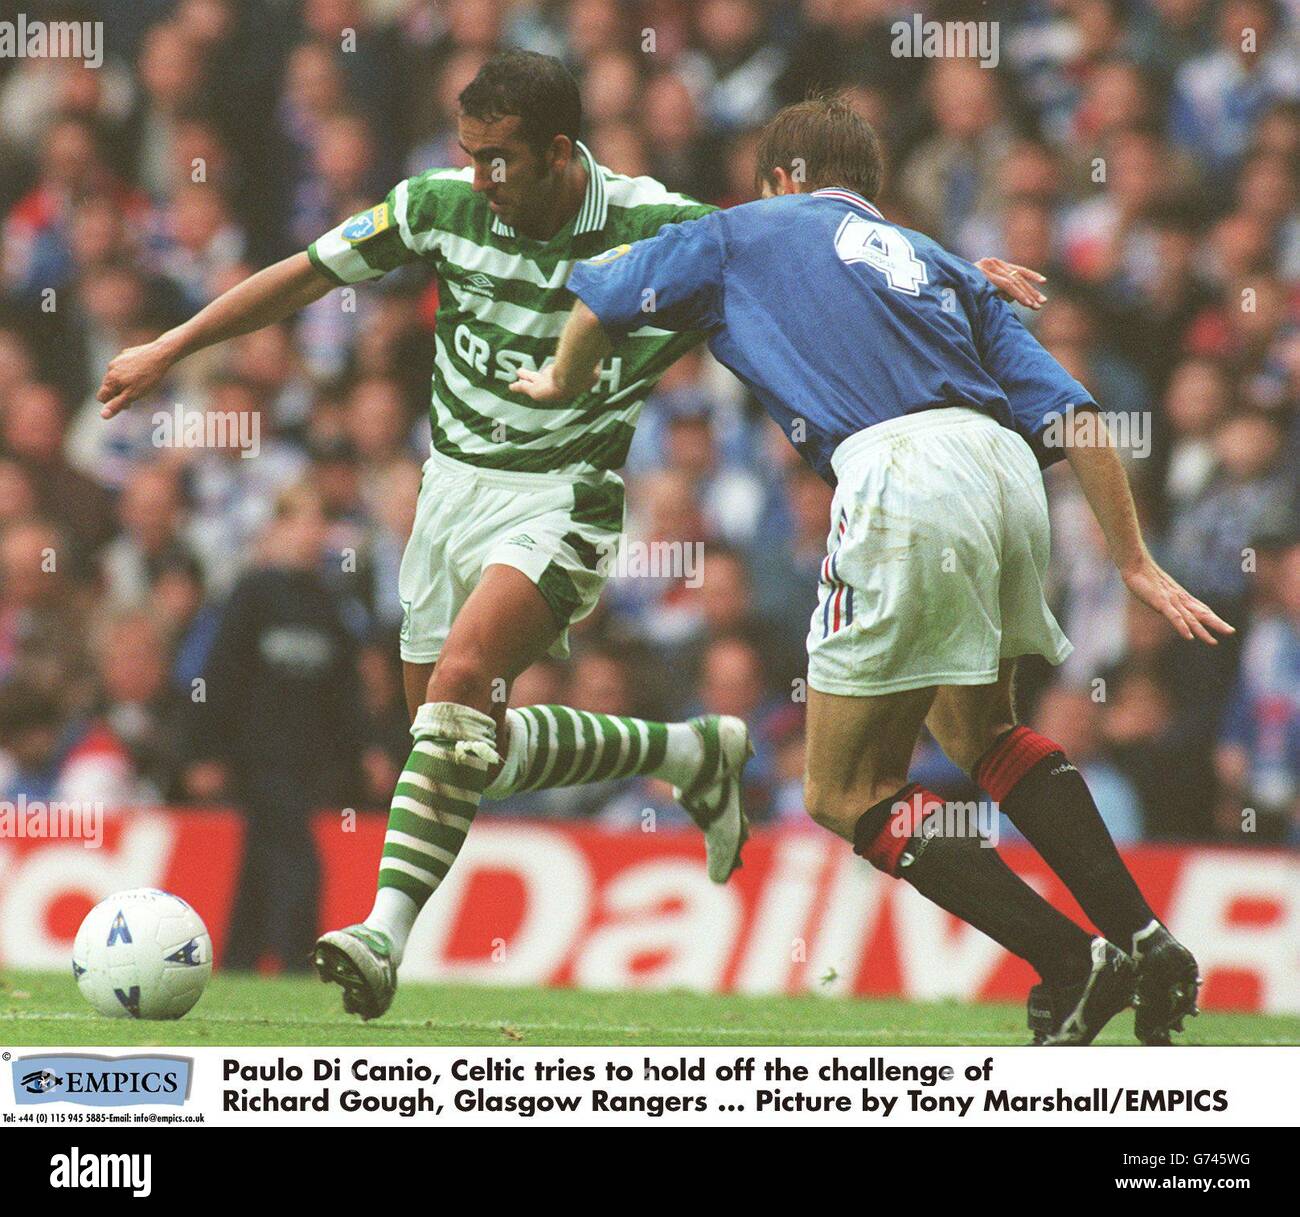 Paolo Di Canio, Celtic tries to hold off the challenge of Richard Gough, Glasgow Rangers ... Picture by Tony Marshall/EMPICS Stock Photo